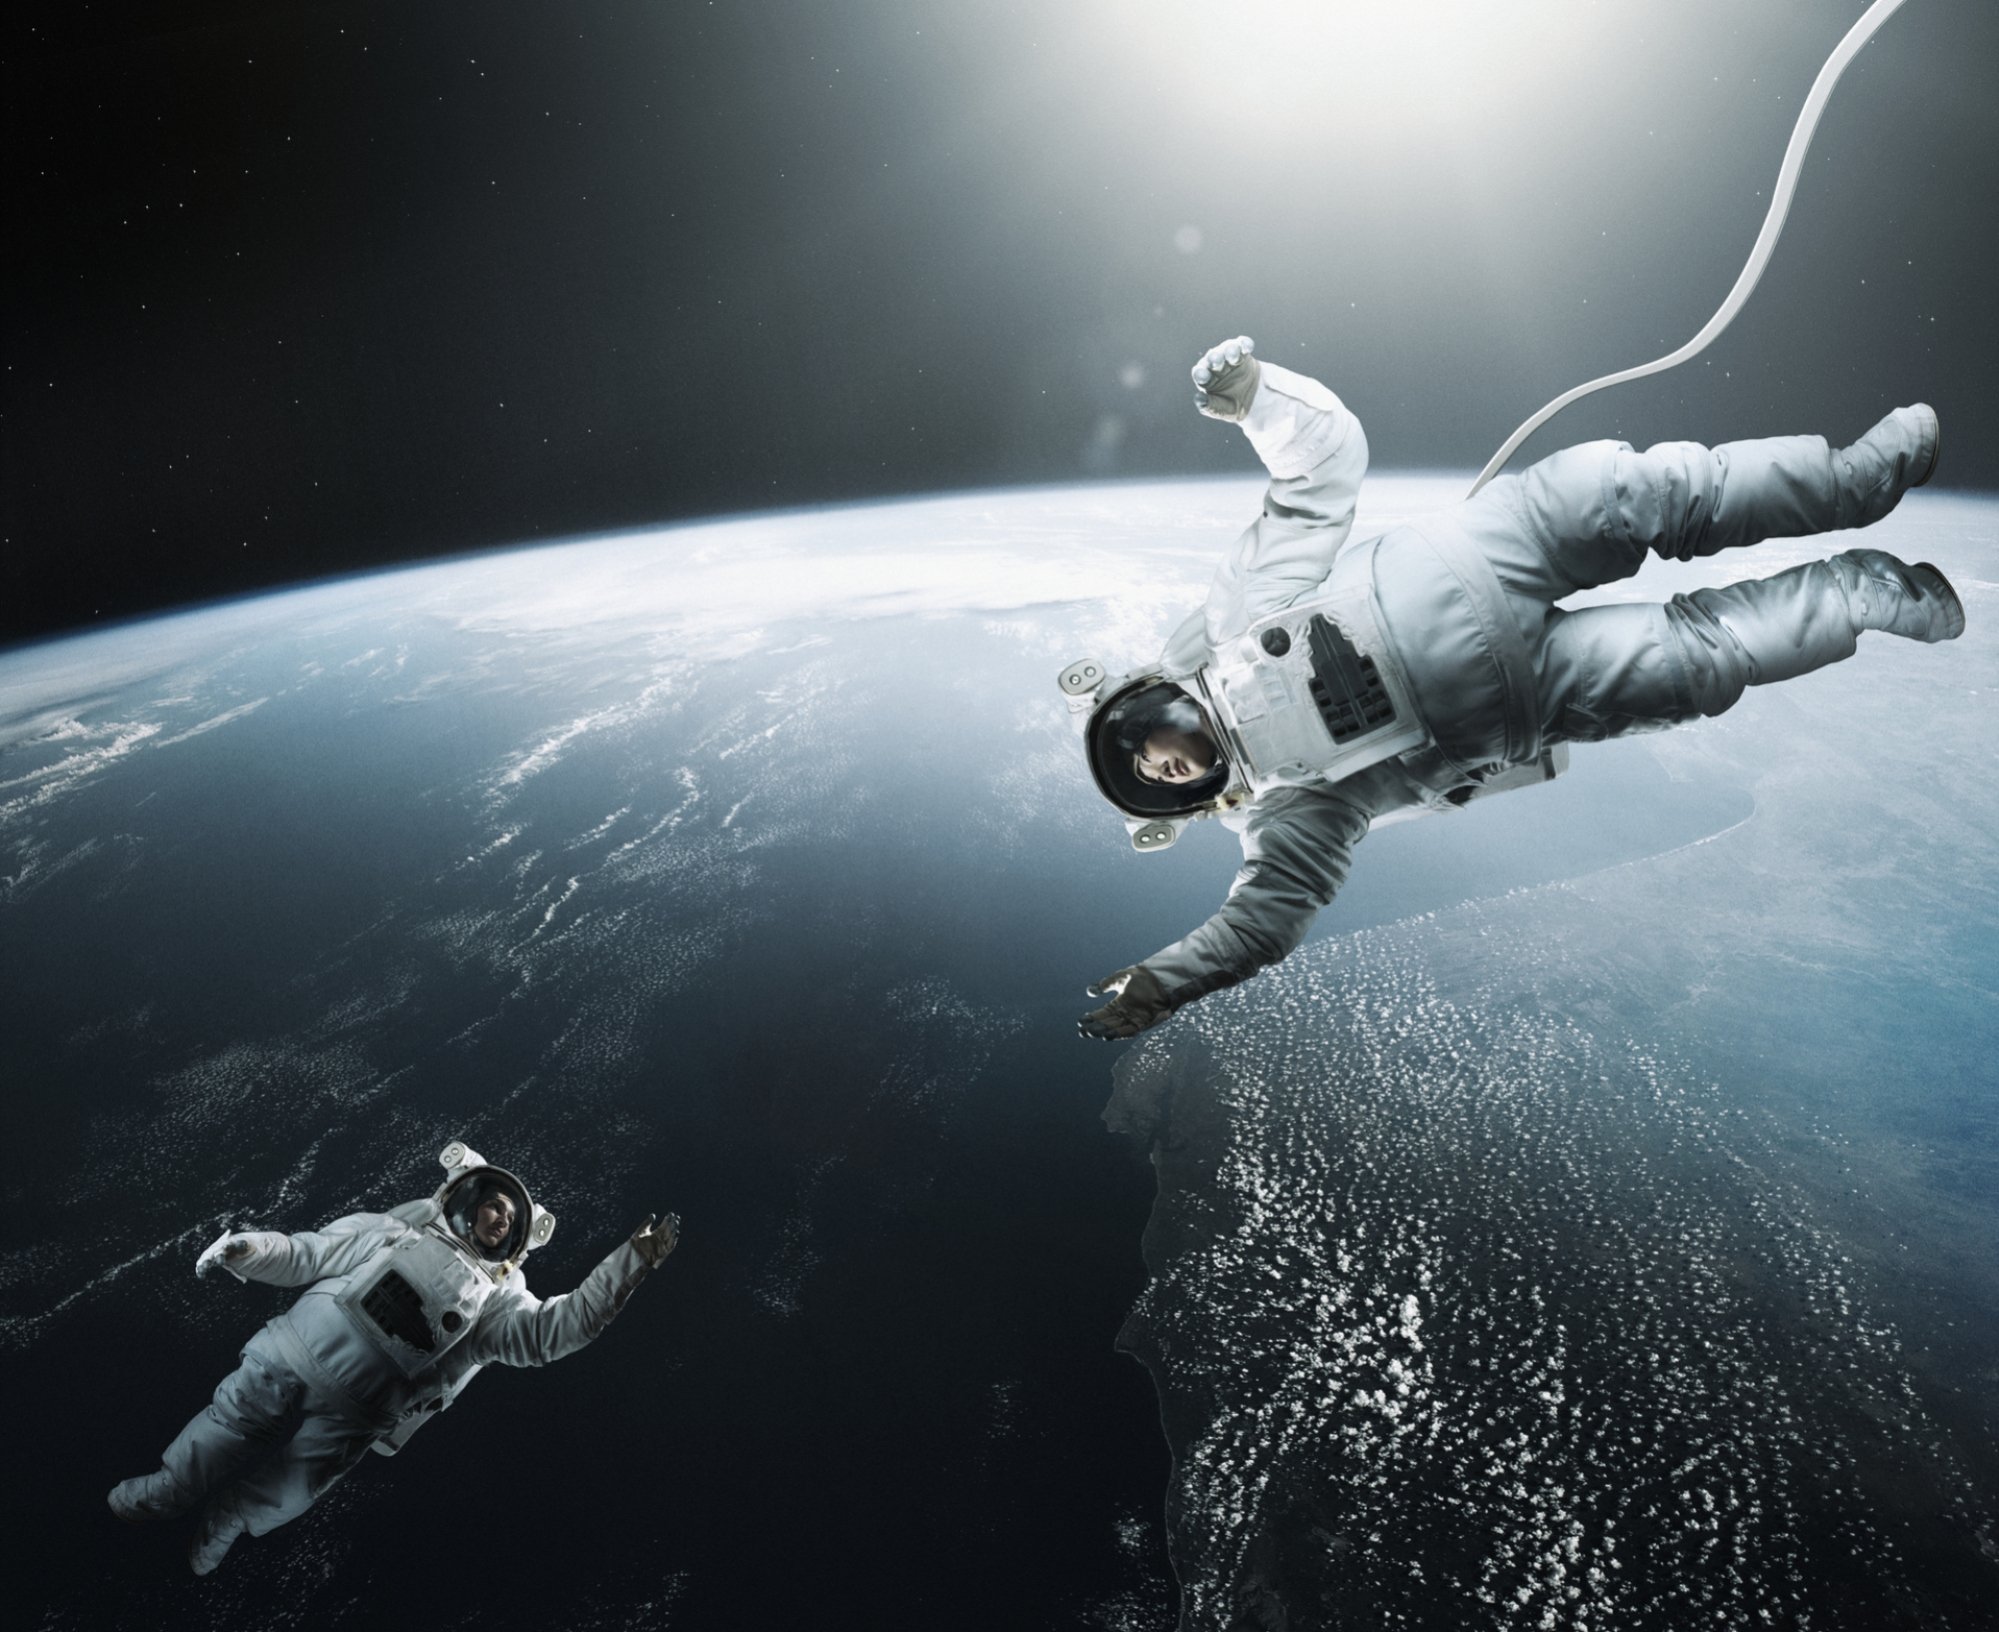 Astronauts flying in space